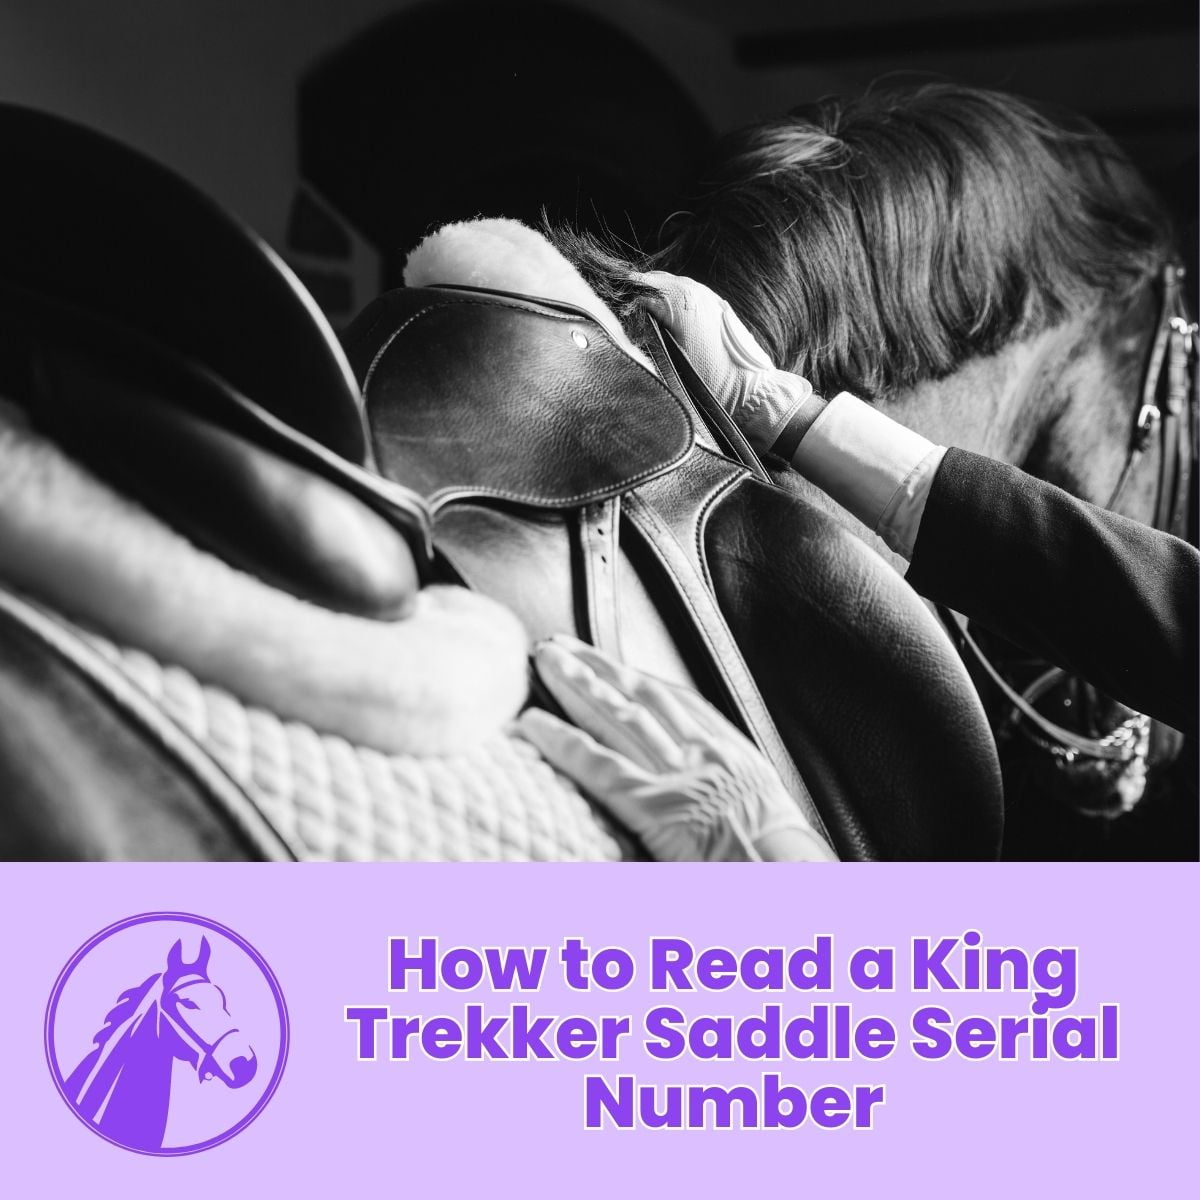 You are currently viewing How to Read a King Trekker Saddle Serial Number